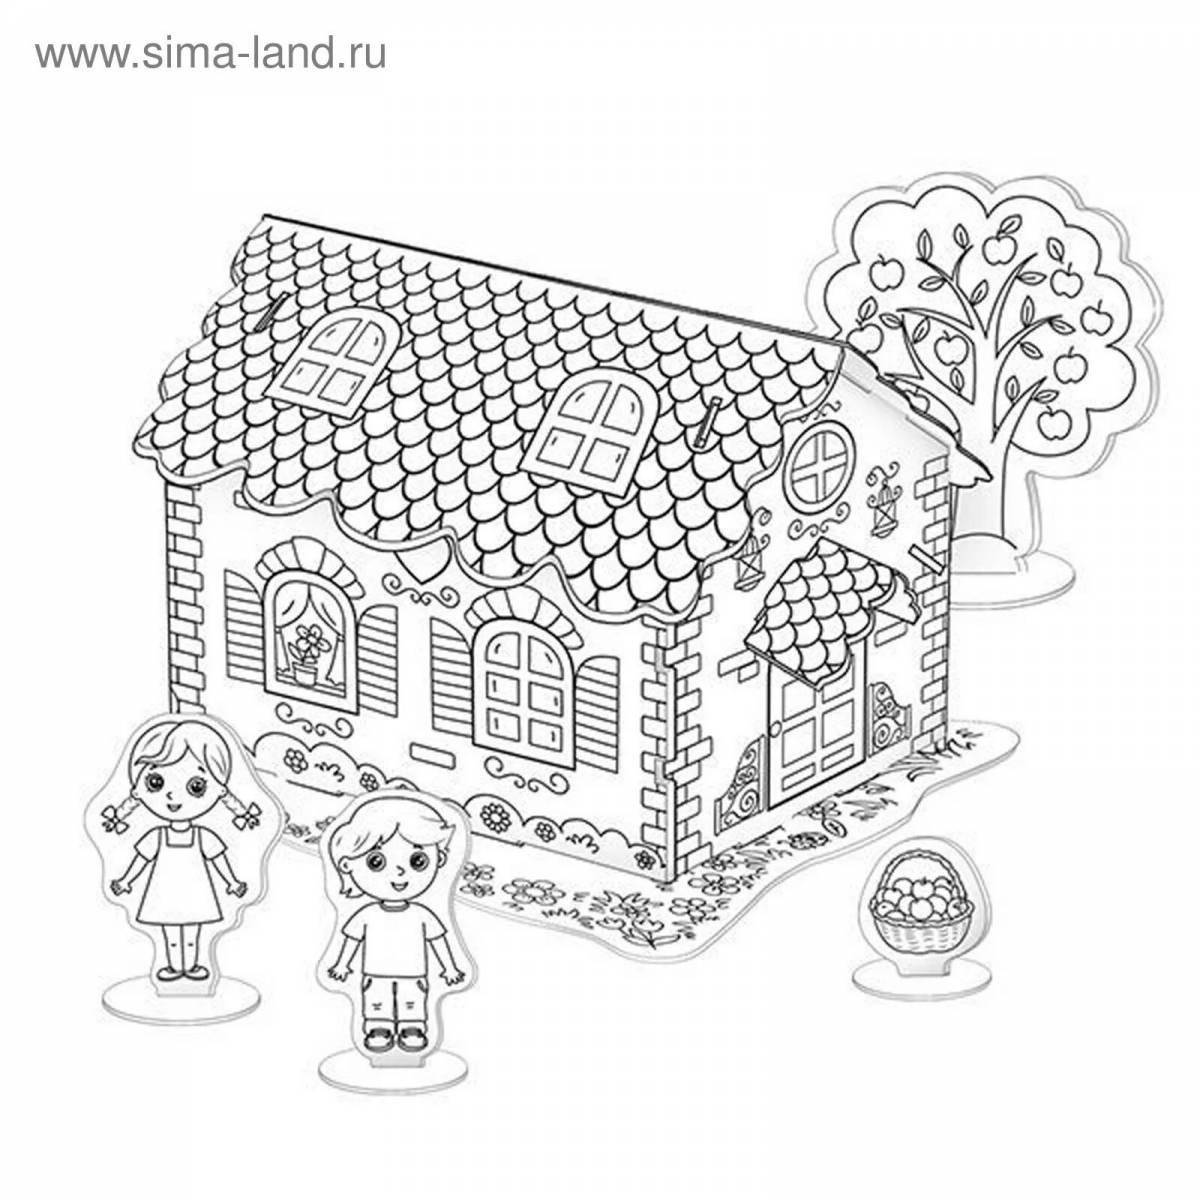 Creative 3d coloring book for kids